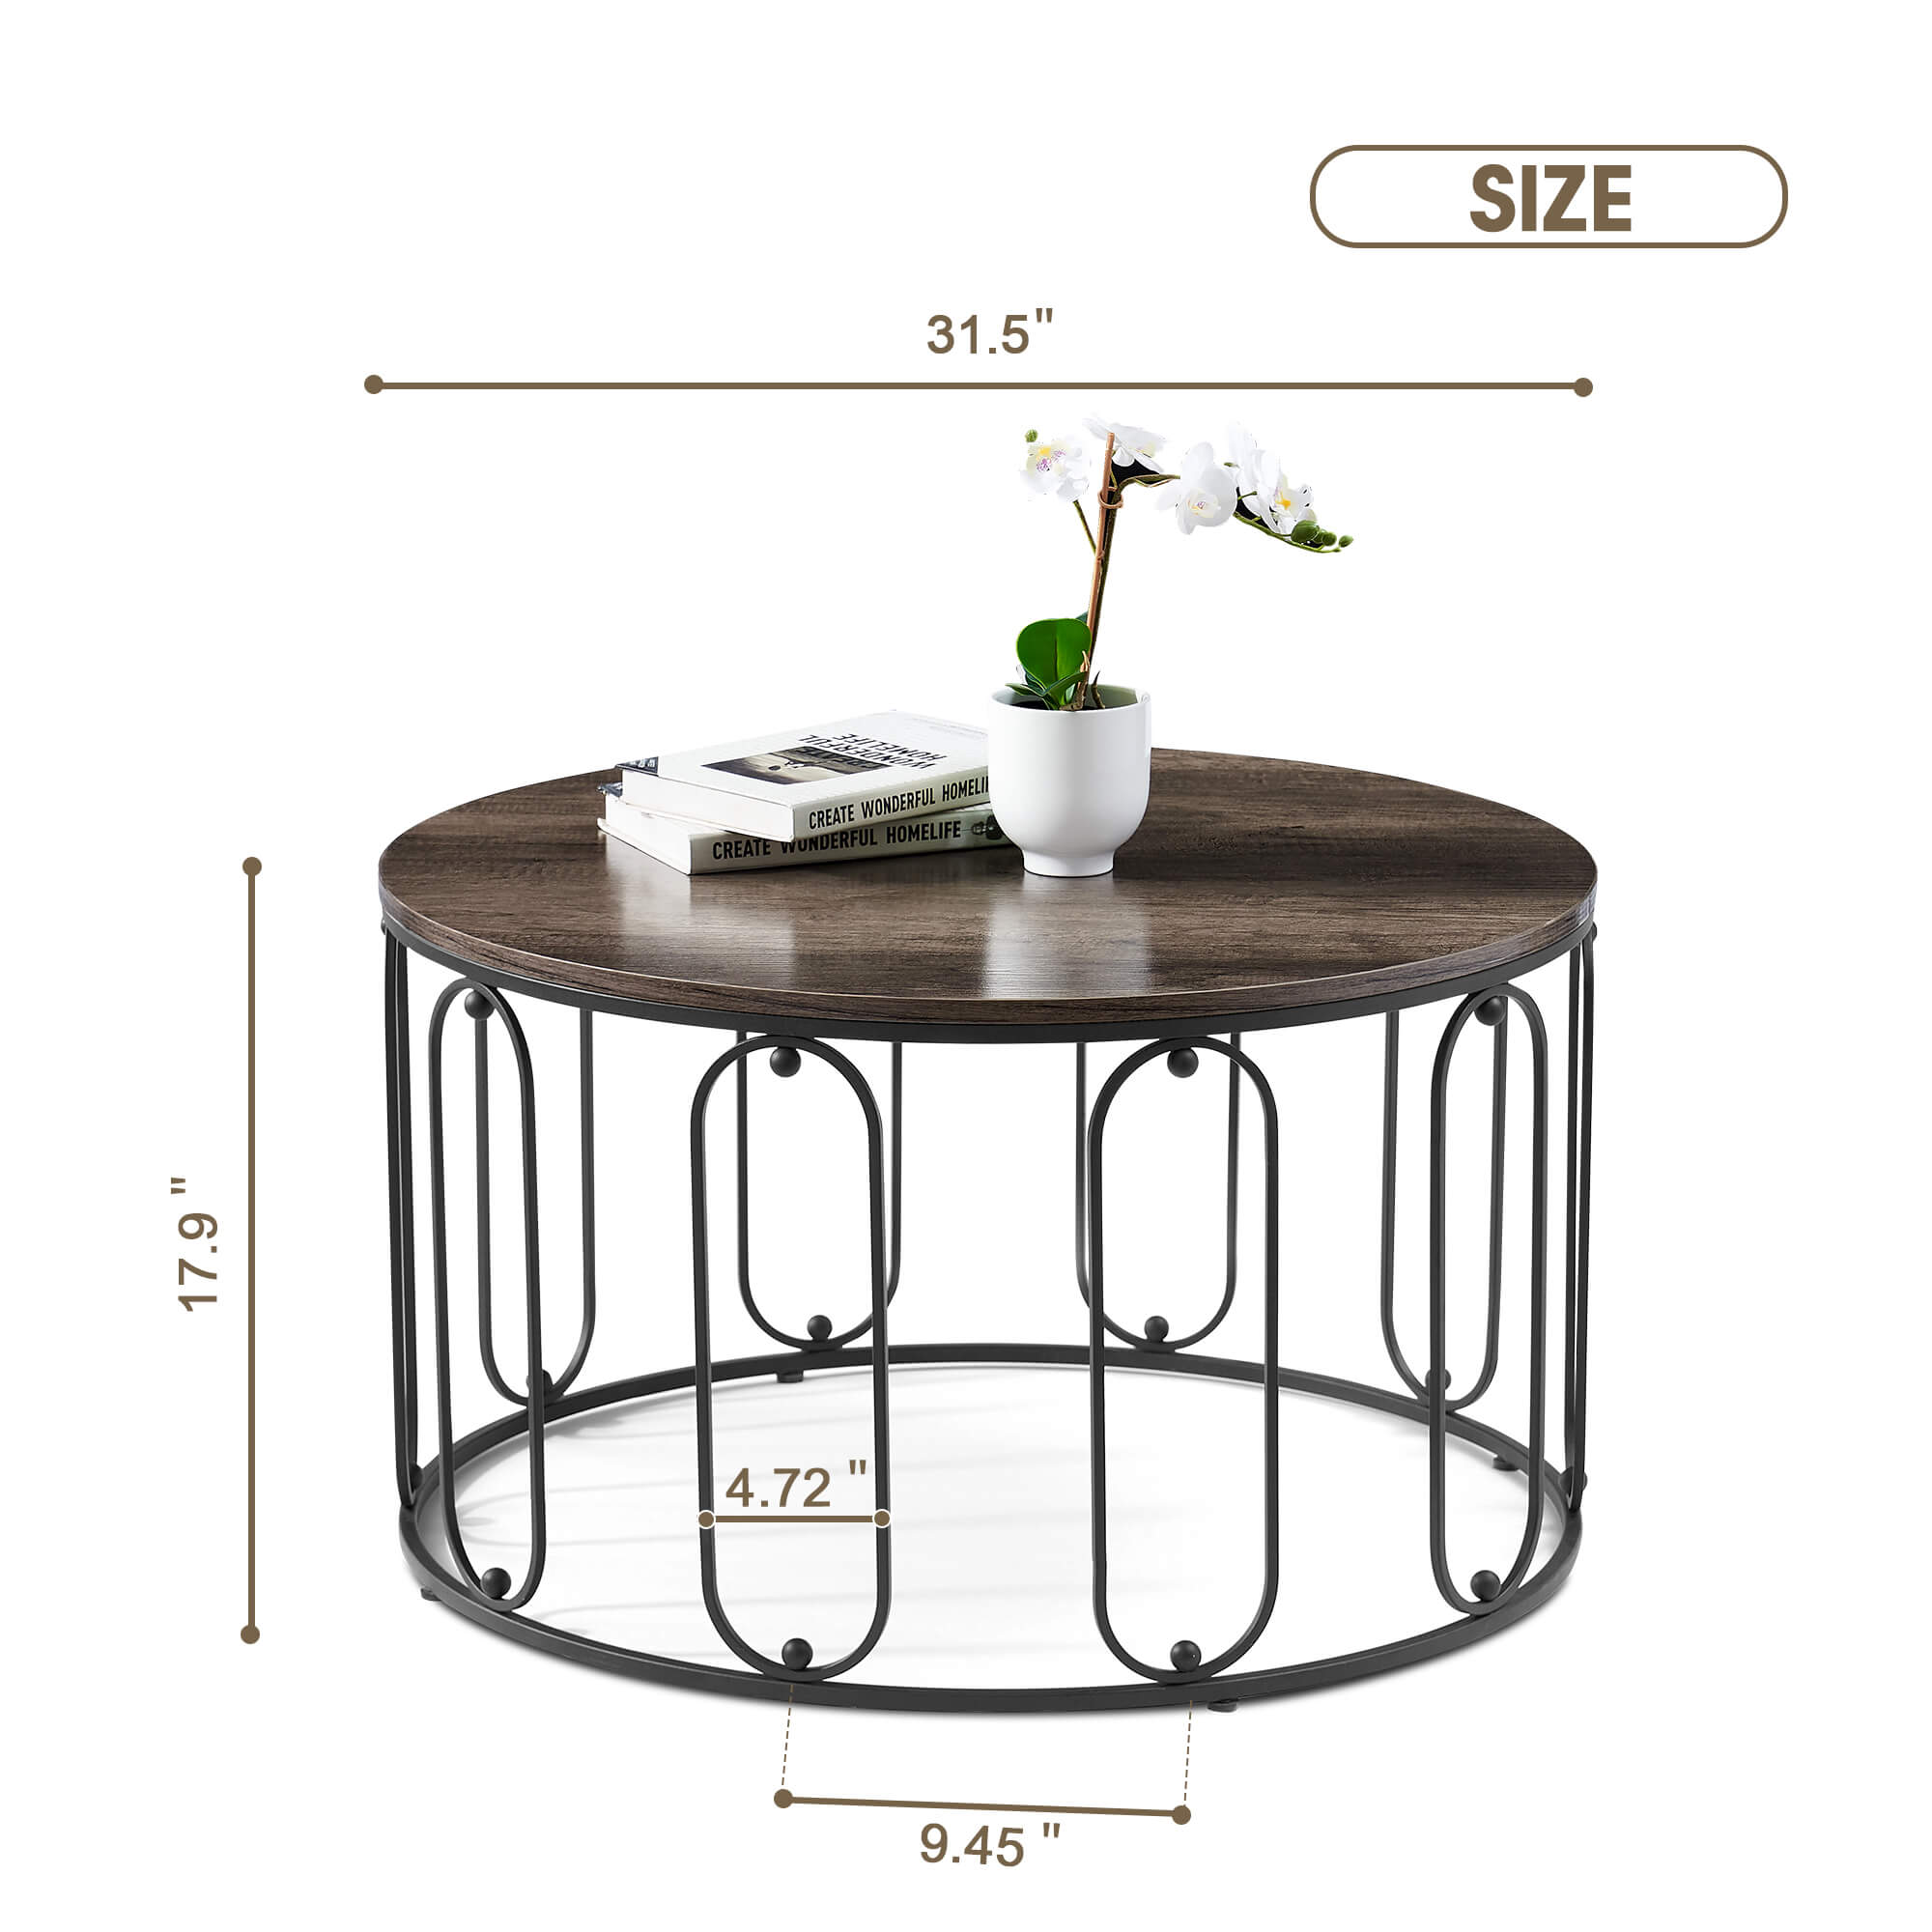 Ivinta Modern Round Coffee Table for Living Room, 31.5 inch Tea Tables